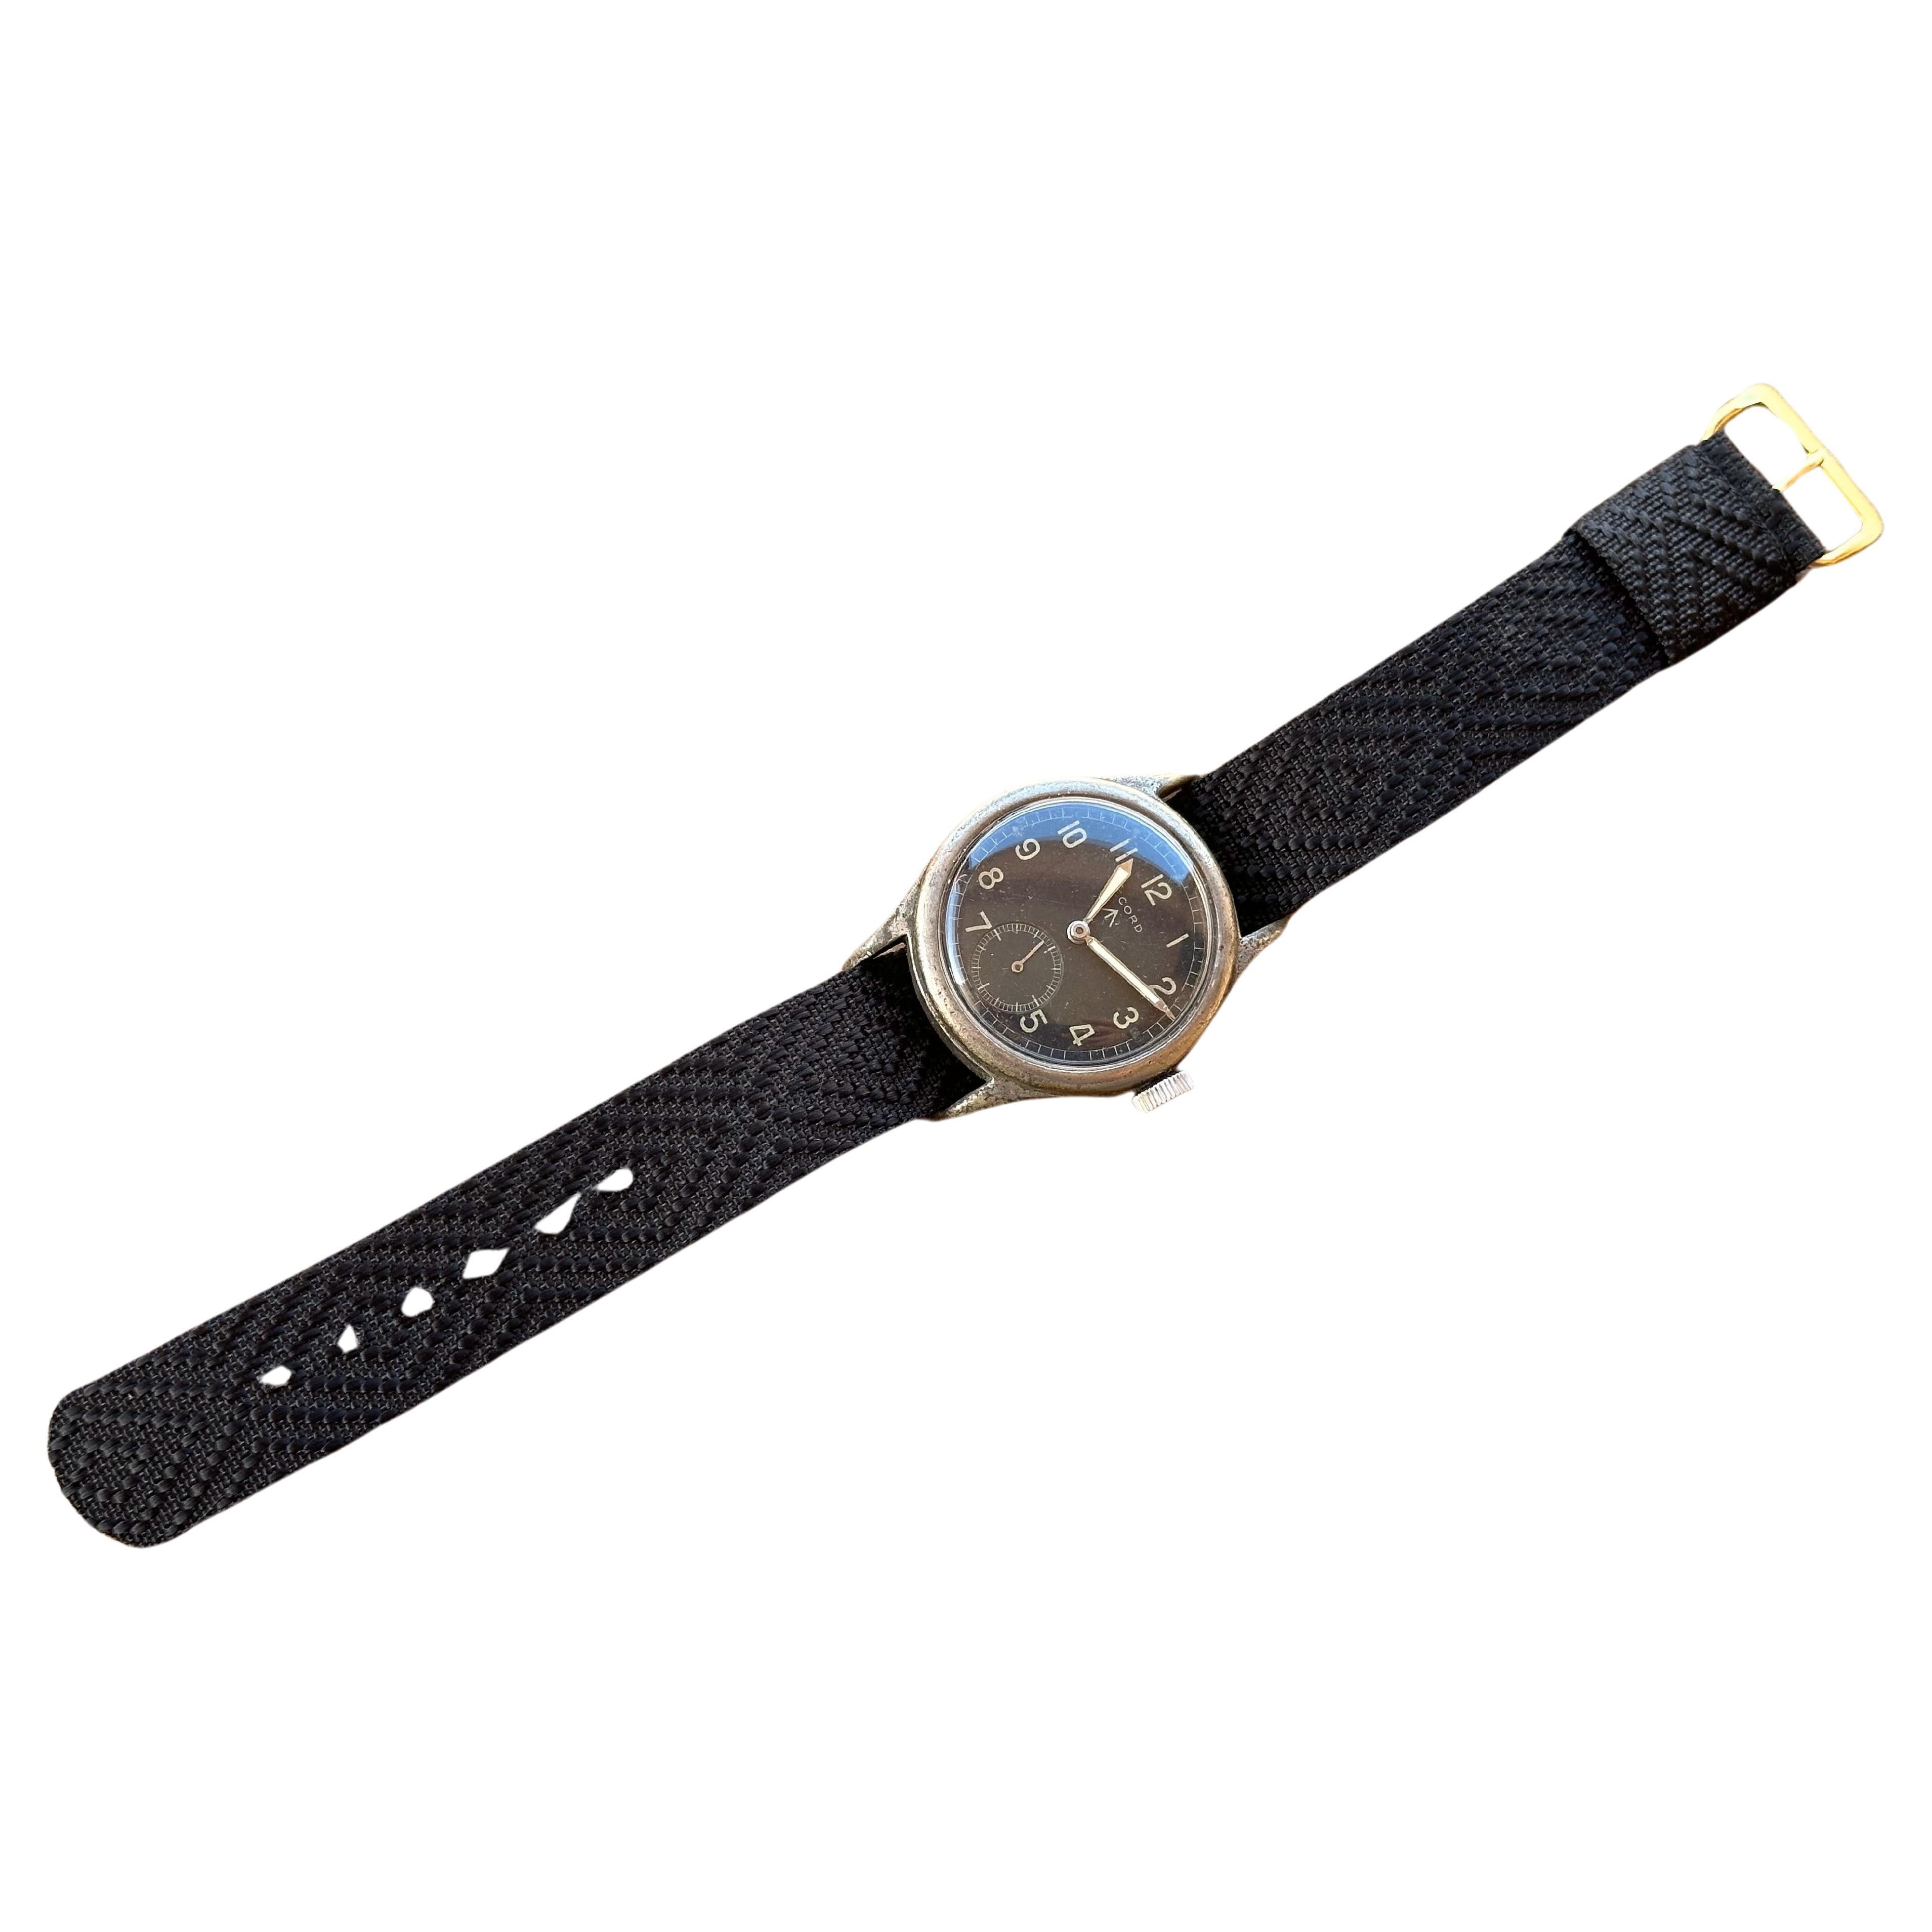 Record Military Issued Dirty Dozen Watch - WWW L33573 Watch. For Sale